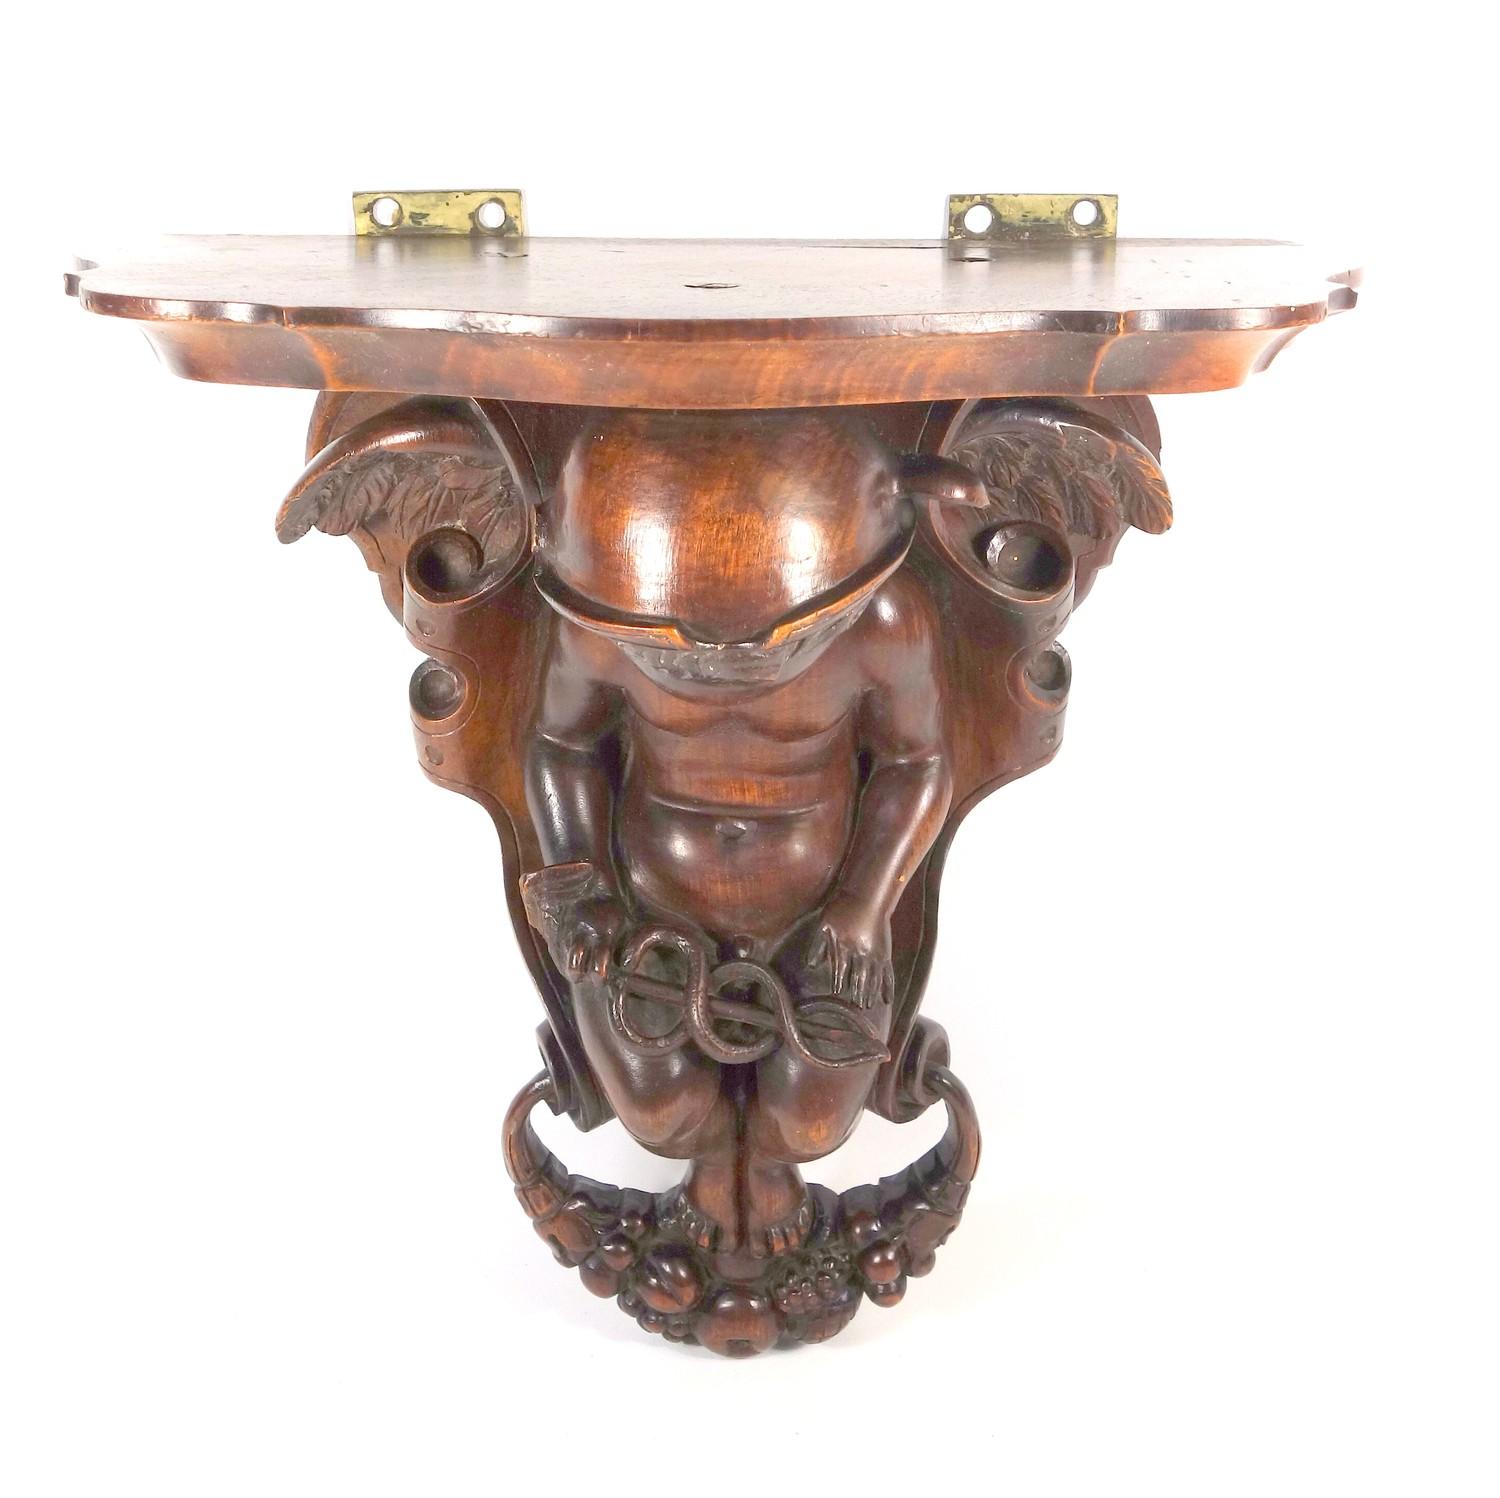 19TH CENTURY ITALIAN CARVED WALNUT WALL BRACKET WITH A FIGURE OF MERCURY SEATED AND HOLDING A